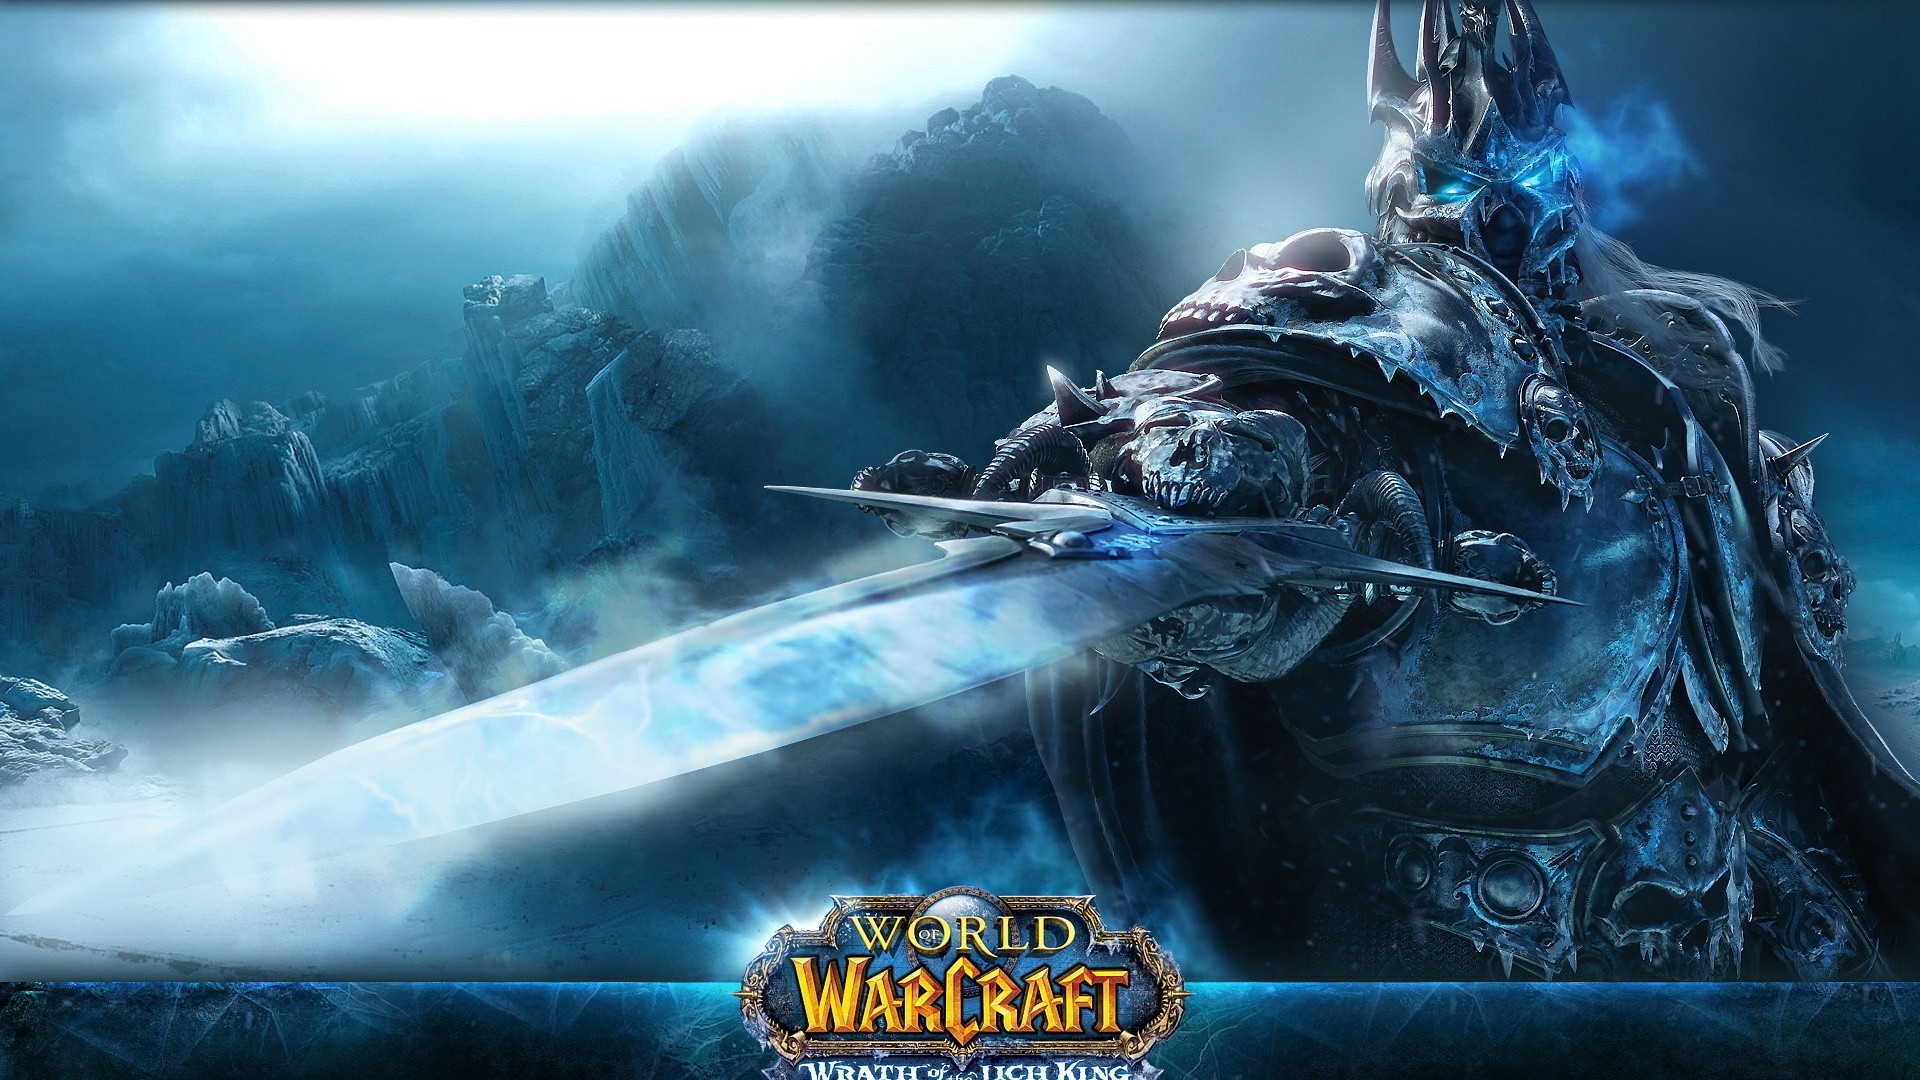 General 1920x1080 World of Warcraft PC gaming World of Warcraft: Wrath of the Lich King sword fantasy art Blizzard Entertainment blue cyan